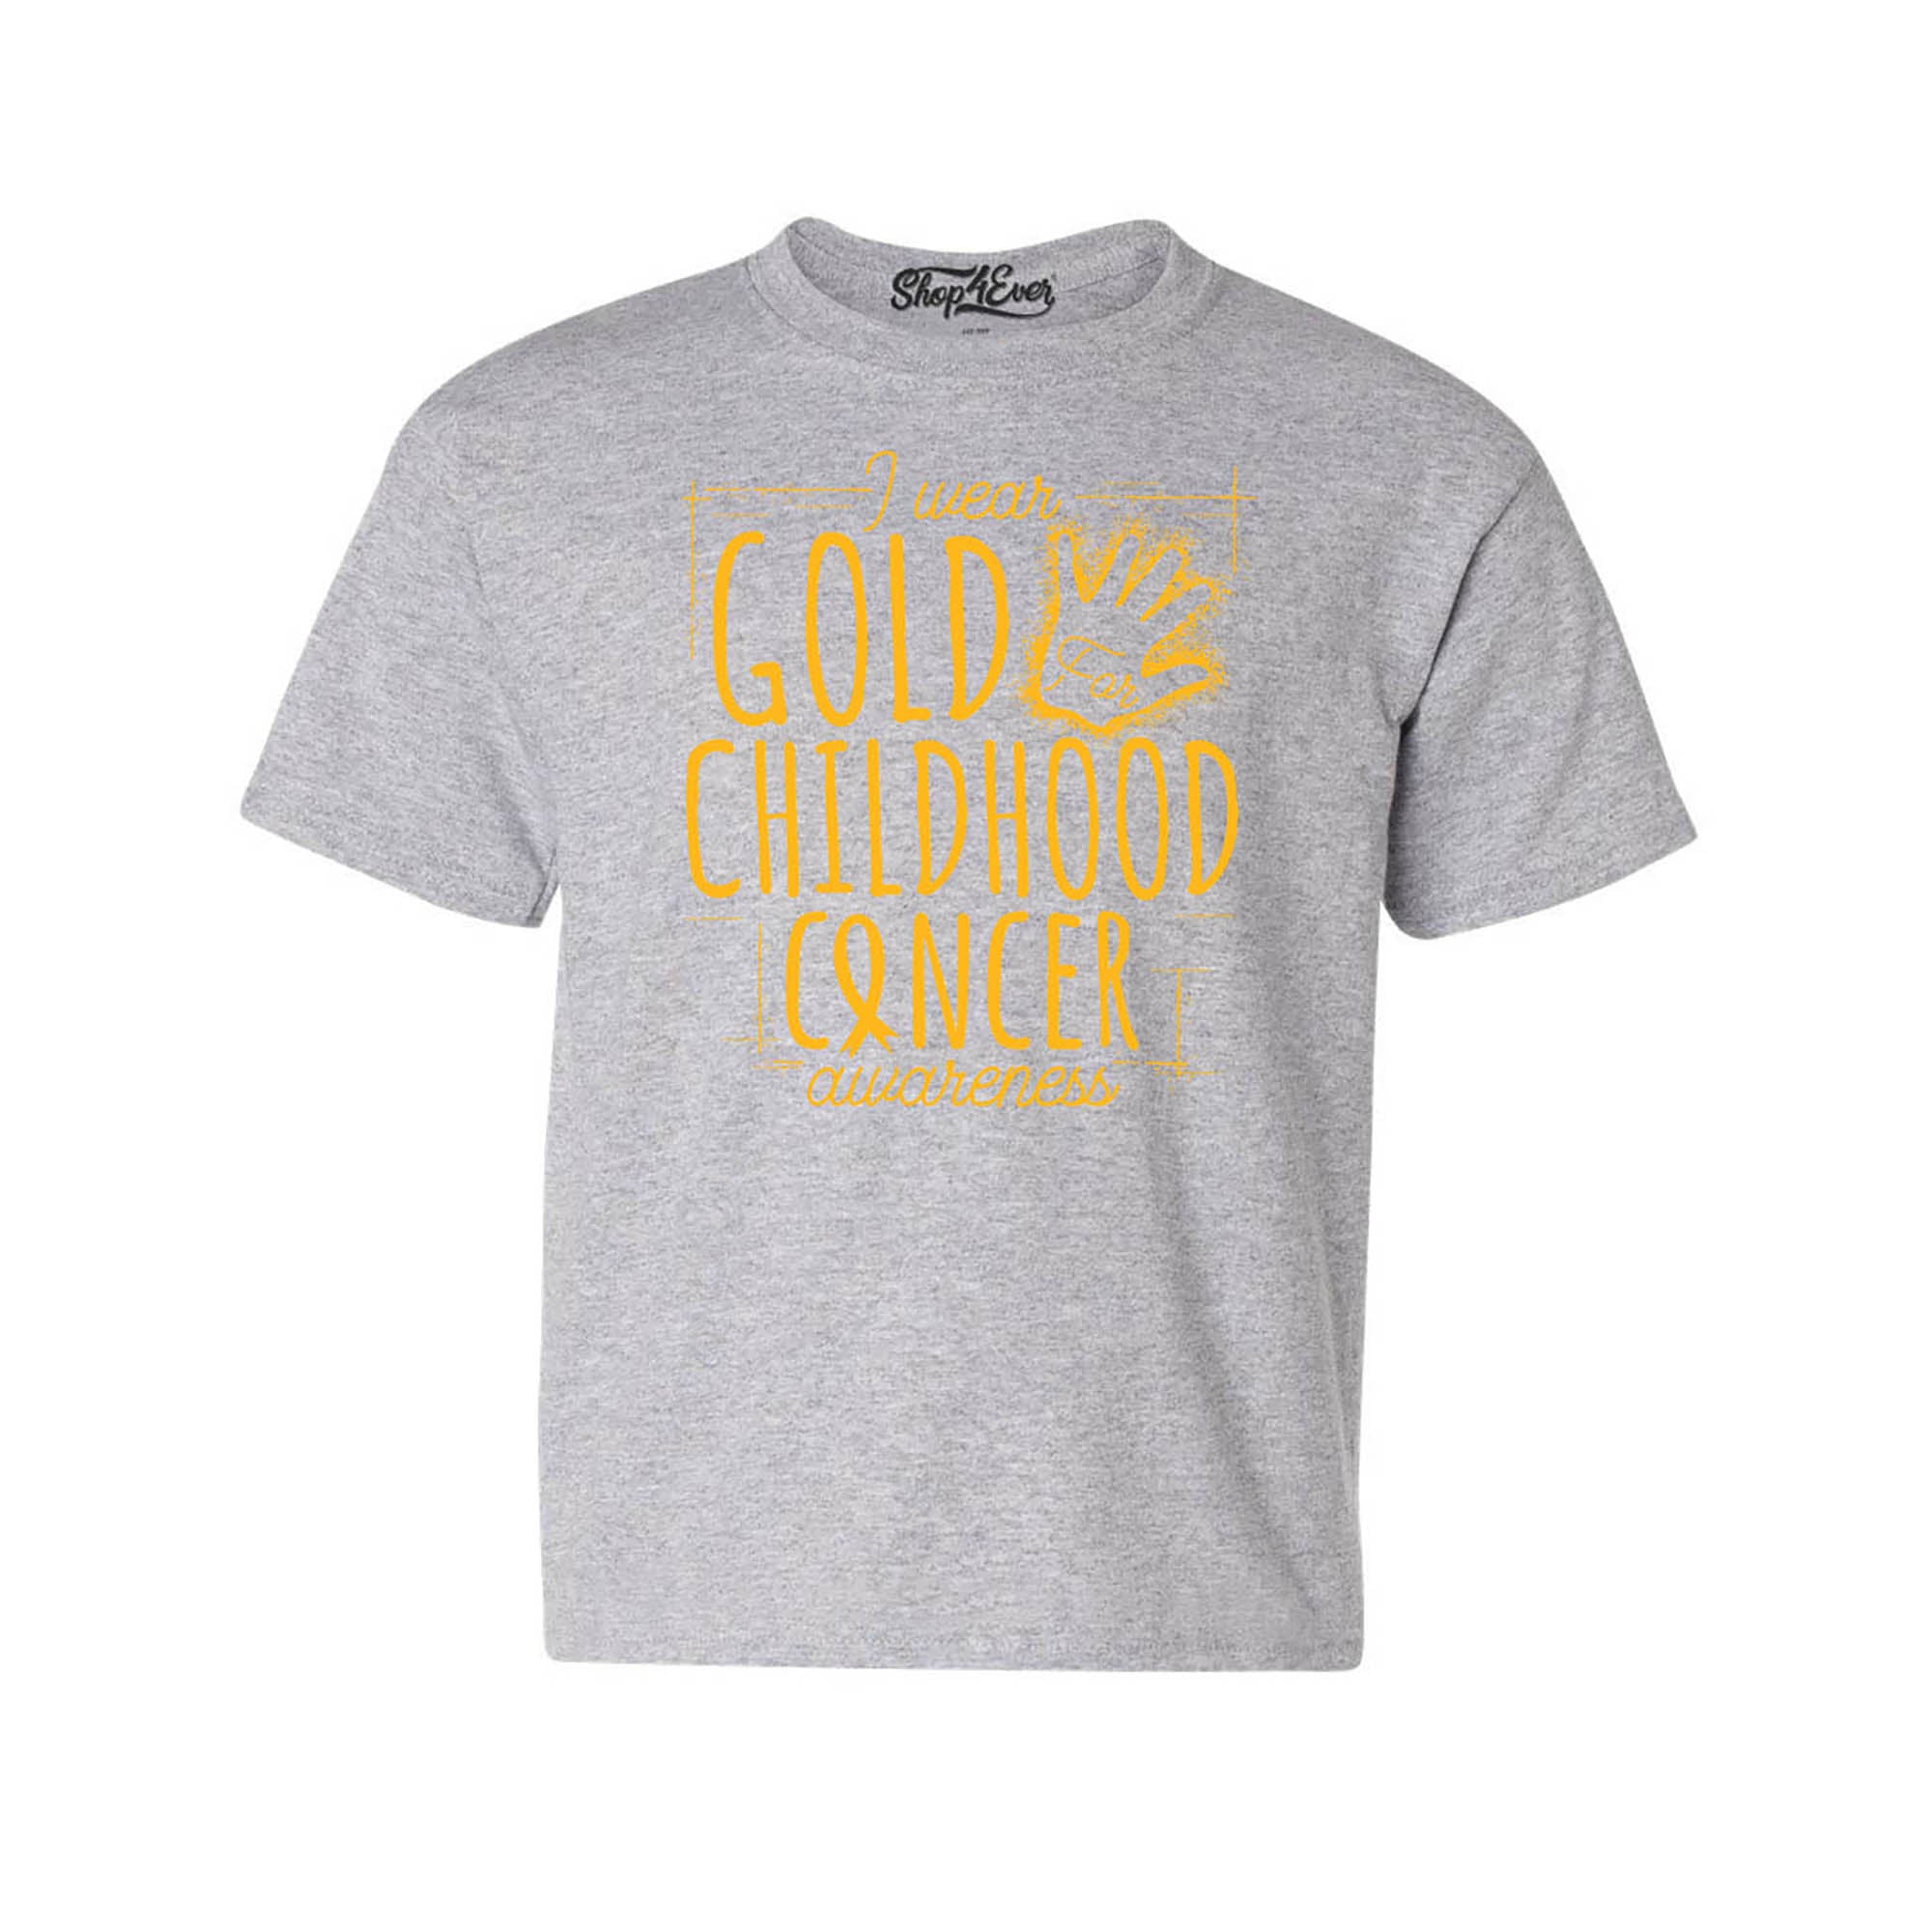 I Wear Gold for Childhood Cancer Awareness Kids Child Youth's T-Shirt